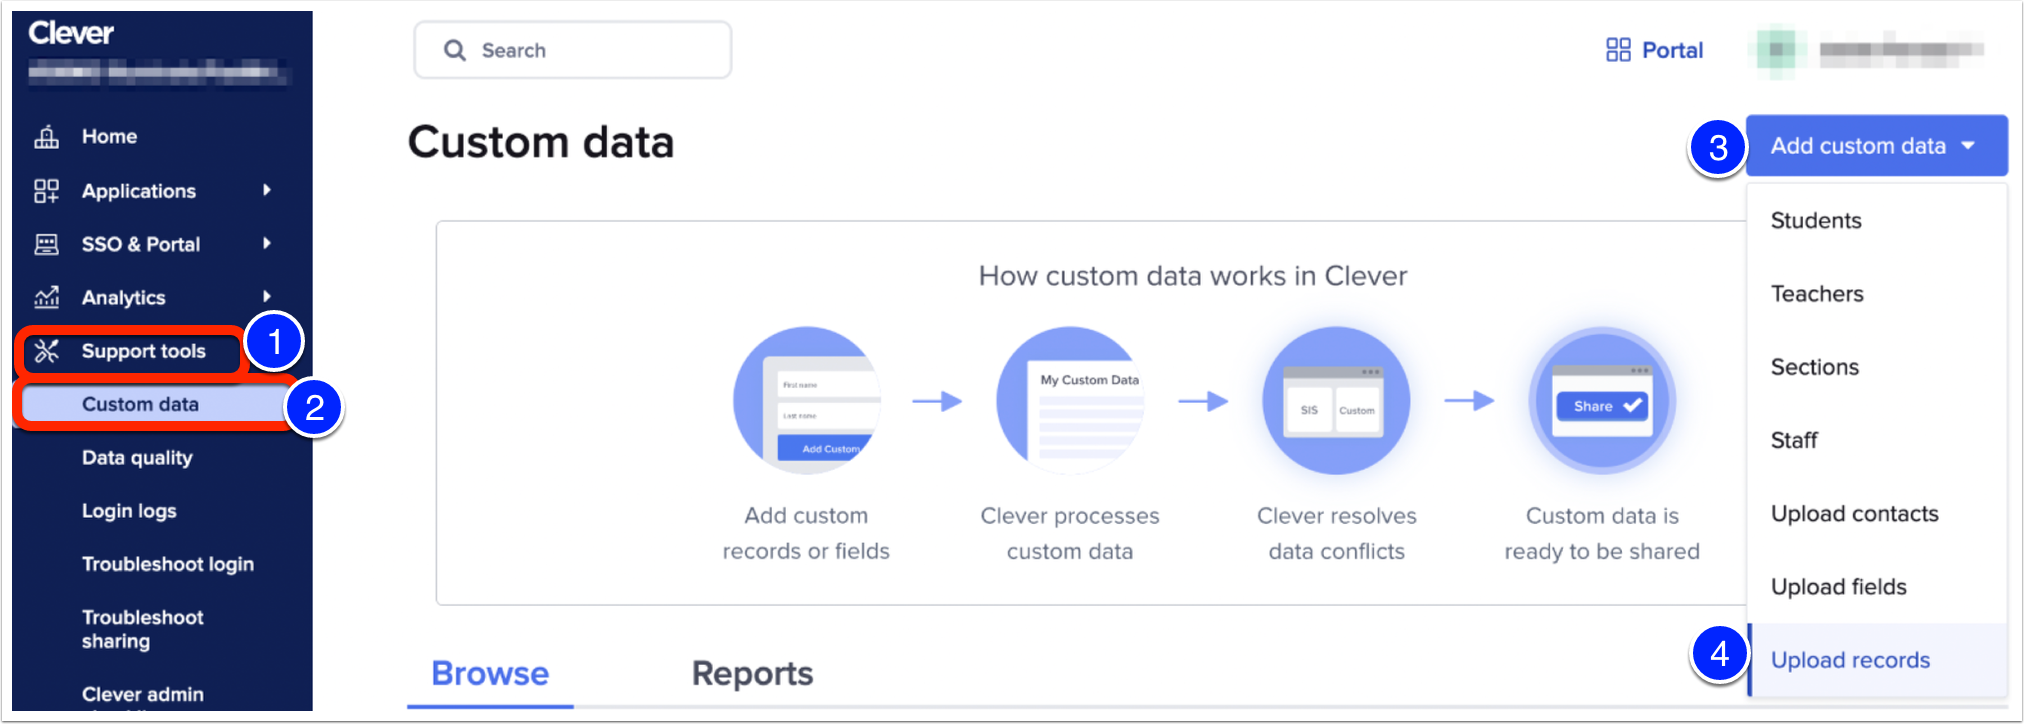 Image of Clever dashboard with Support Tools marked as step 1, custom data marked as step 2, add custom data marked as step 3, and upload records marked as step 4